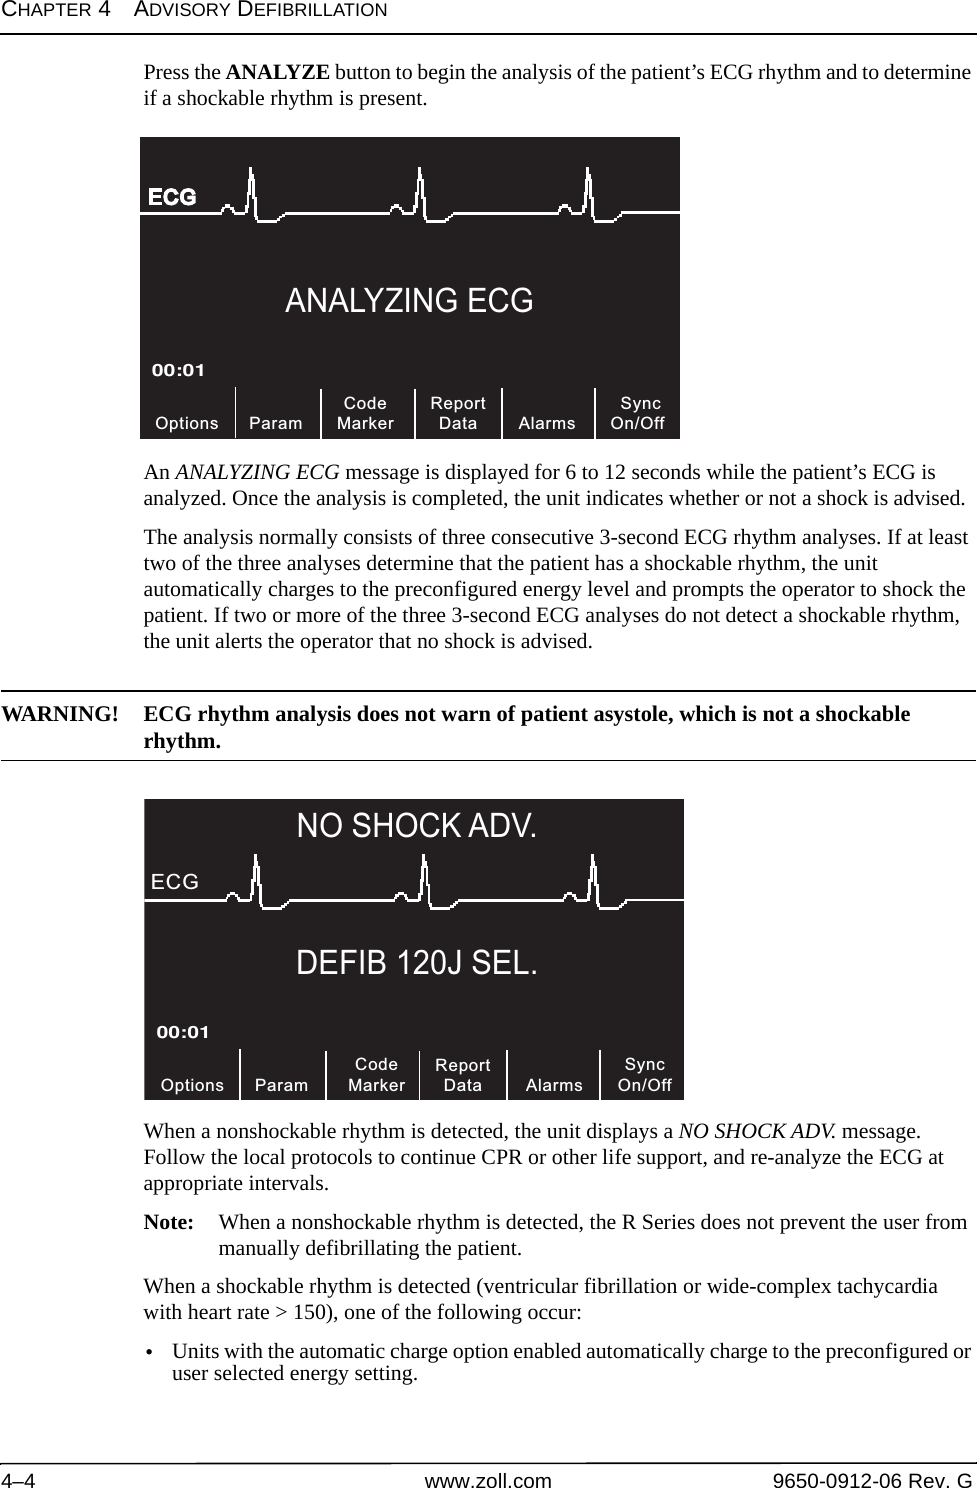 CHAPTER 4ADVISORY DEFIBRILLATION4–4 www.zoll.com 9650-0912-06 Rev. GPress the ANALYZE button to begin the analysis of the patient’s ECG rhythm and to determine if a shockable rhythm is present.An ANALYZING ECG message is displayed for 6 to 12 seconds while the patient’s ECG is analyzed. Once the analysis is completed, the unit indicates whether or not a shock is advised.The analysis normally consists of three consecutive 3-second ECG rhythm analyses. If at least two of the three analyses determine that the patient has a shockable rhythm, the unit automatically charges to the preconfigured energy level and prompts the operator to shock the patient. If two or more of the three 3-second ECG analyses do not detect a shockable rhythm, the unit alerts the operator that no shock is advised.WARNING! ECG rhythm analysis does not warn of patient asystole, which is not a shockable rhythm.When a nonshockable rhythm is detected, the unit displays a NO SHOCK ADV. message. Follow the local protocols to continue CPR or other life support, and re-analyze the ECG at appropriate intervals.Note: When a nonshockable rhythm is detected, the R Series does not prevent the user from manually defibrillating the patient.When a shockable rhythm is detected (ventricular fibrillation or wide-complex tachycardia with heart rate &gt; 150), one of the following occur:•Units with the automatic charge option enabled automatically charge to the preconfigured or user selected energy setting.ANALYZING ECGCodeMarker00:01ECG Param SyncOn/OffAlarms Options ReportDataDEFIB 120J SEL.SyncOn/Off00:01ECGNO SHOCK ADV. Alarms Param OptionsCodeMarker ReportData 